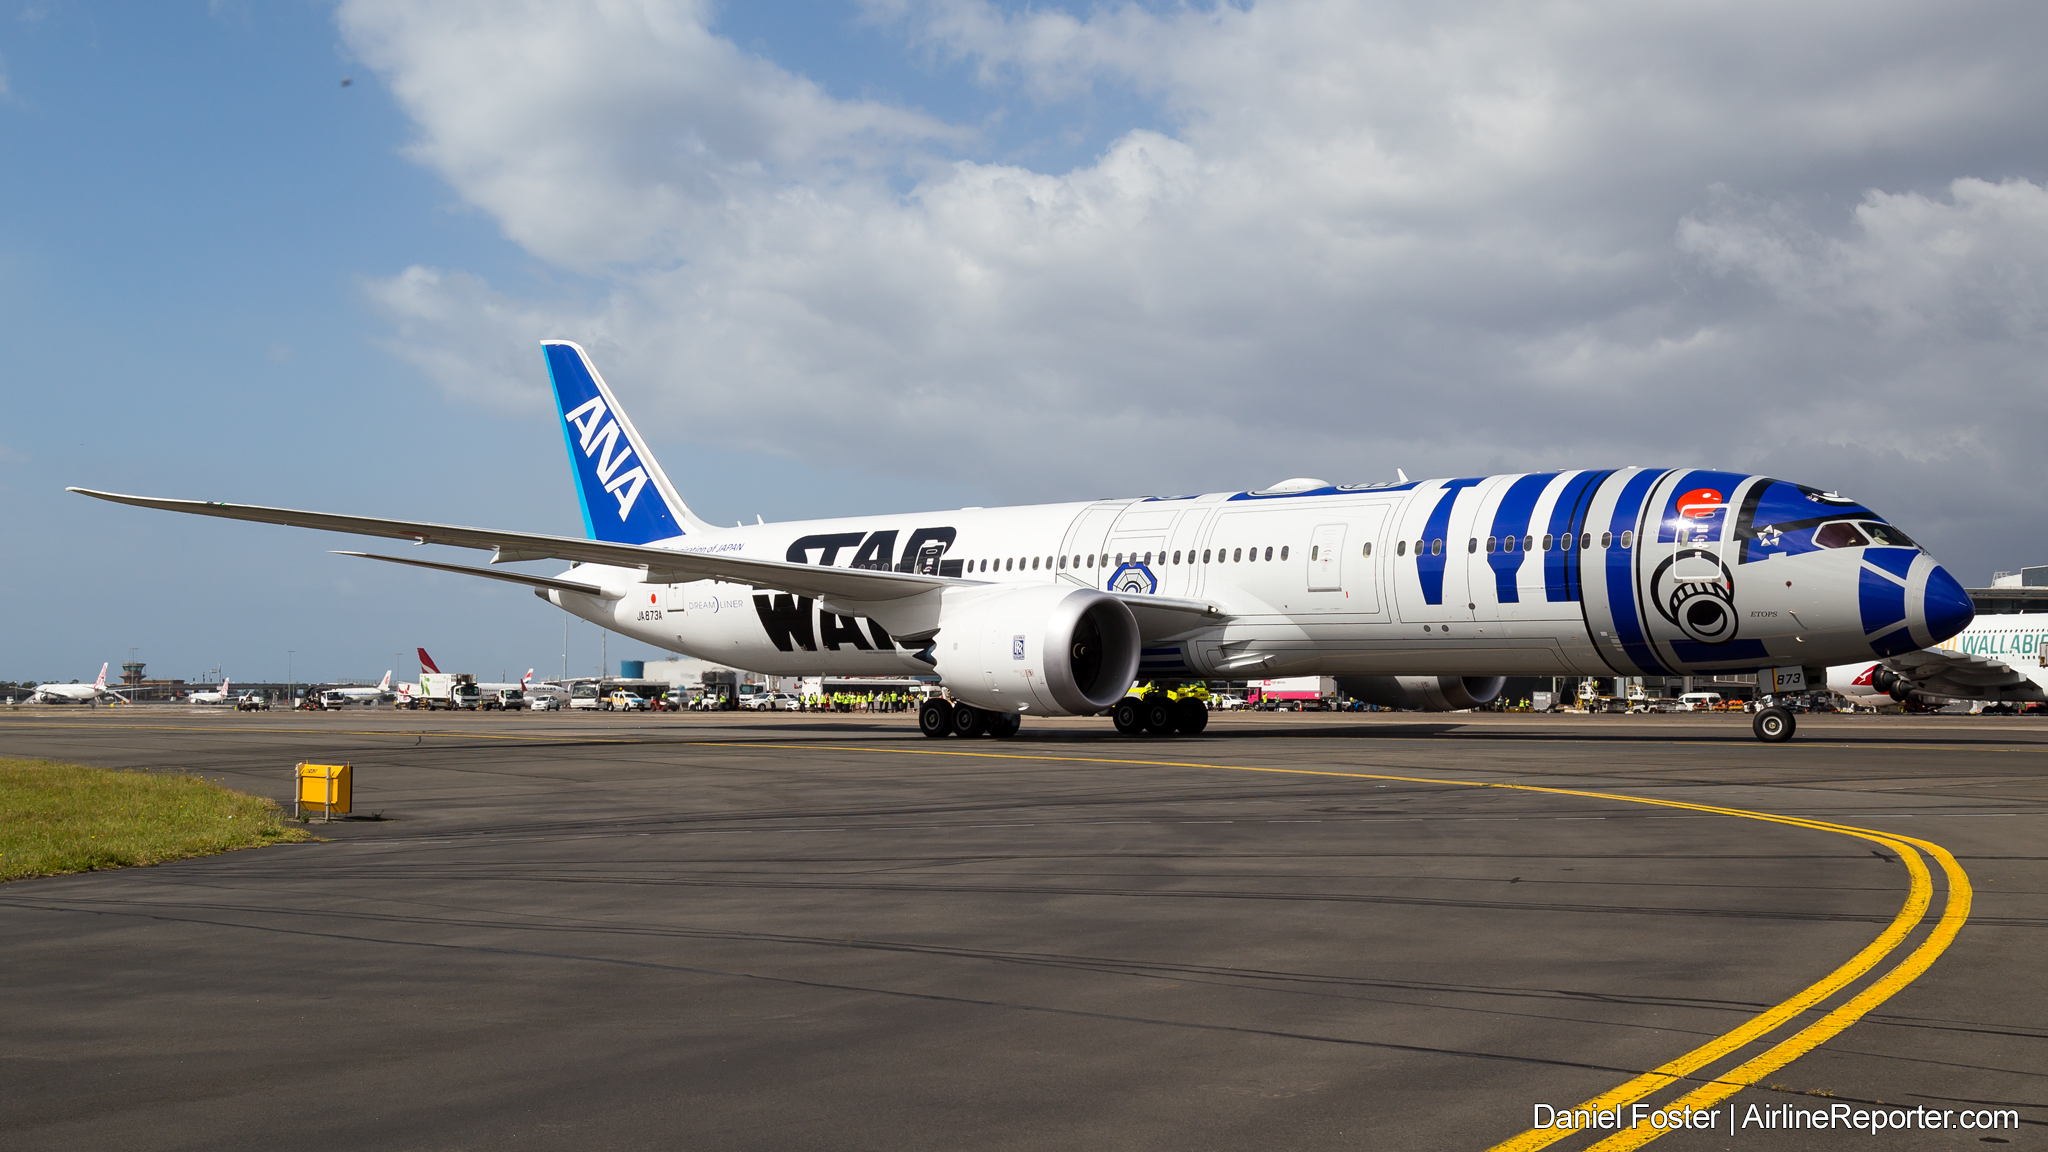 Ana Returns To Sydney In Style With The R2 D2 Star Wars Dreamliner Airlinereporter Airlinereporter